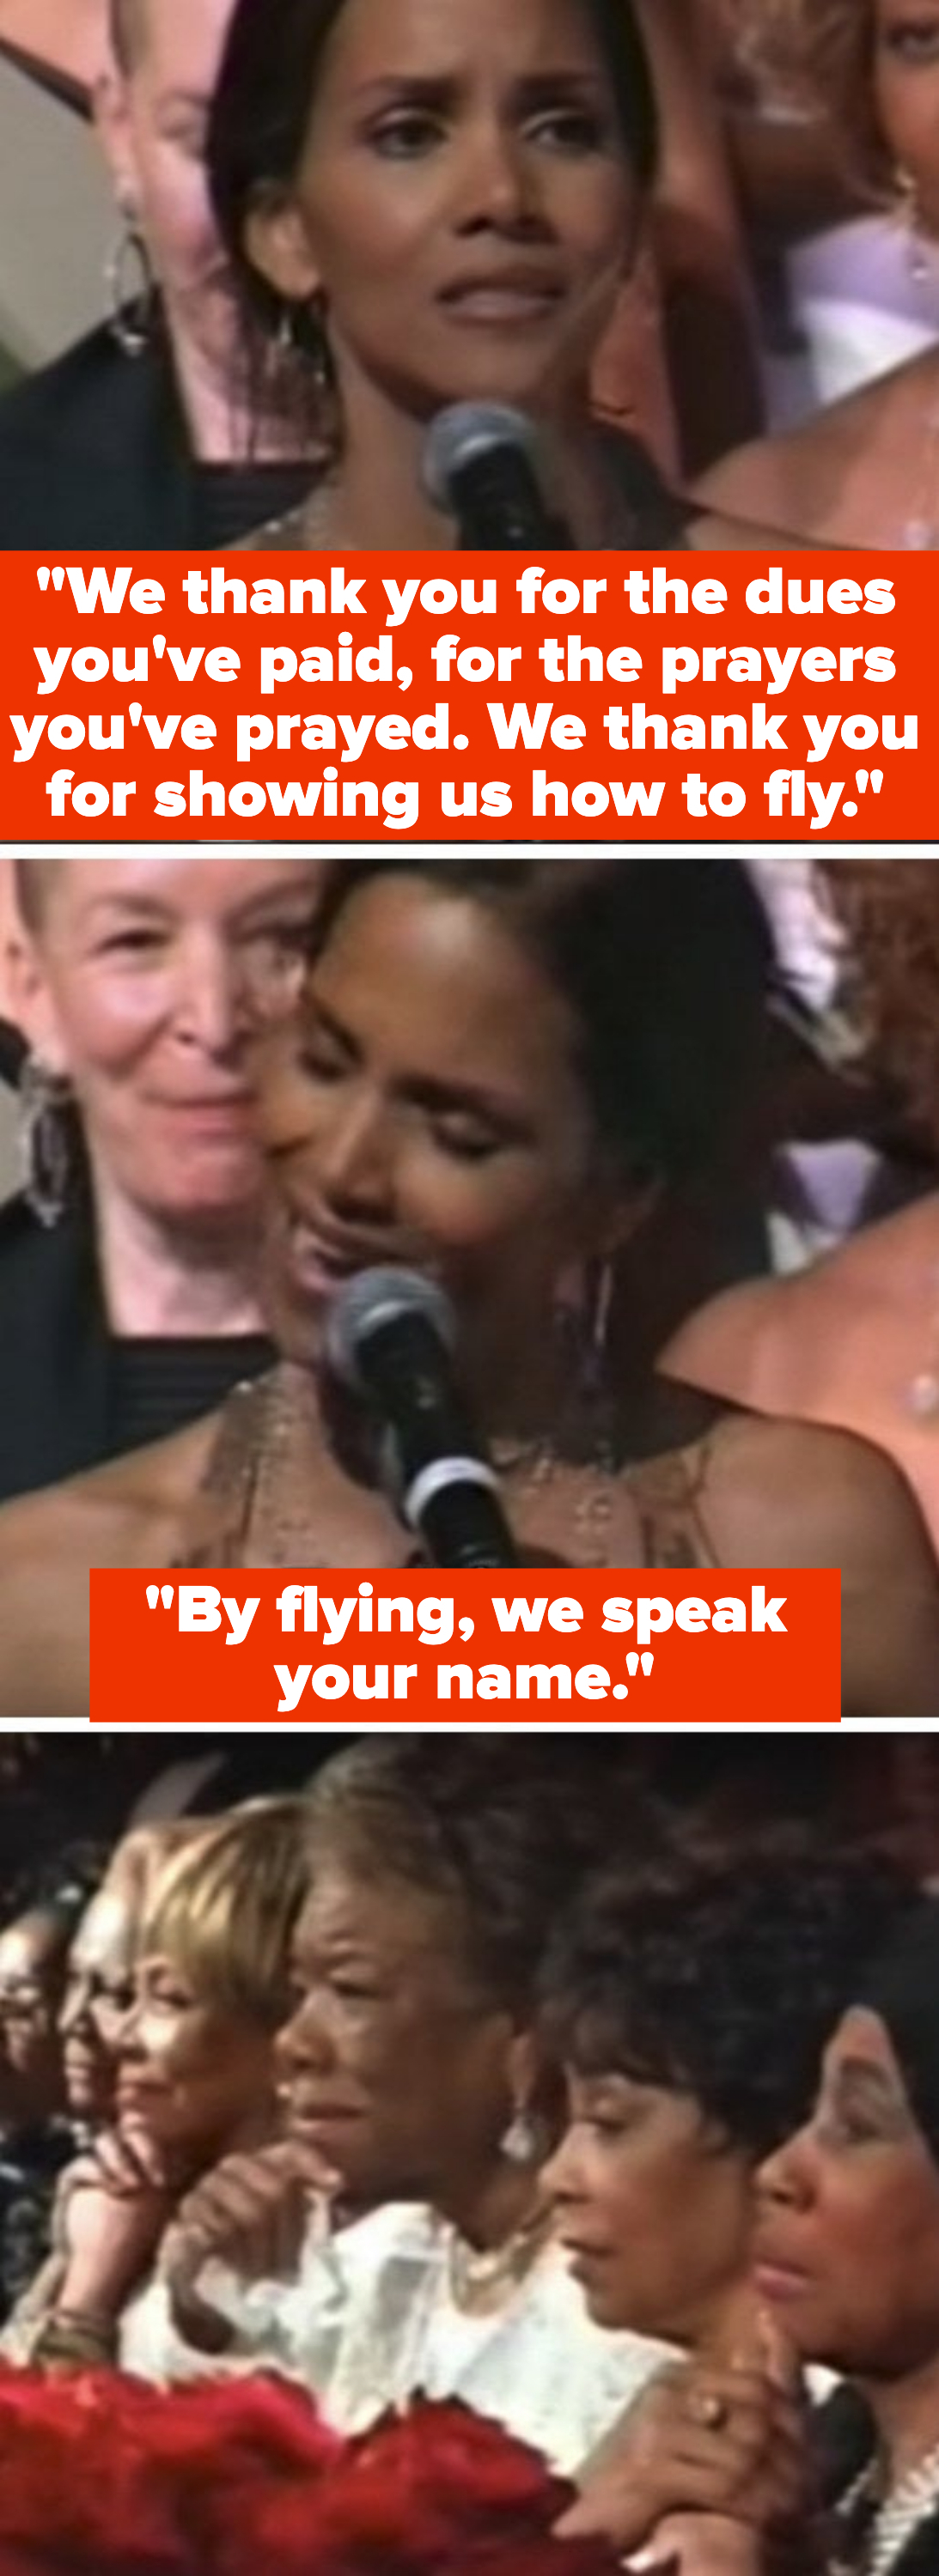 Halle Berry thanking the legends, saying: &quot;We thank you for the dues you&#x27;ve paid, for the prayers you&#x27;ve prayed. We thank you for showing us how to fly. By flying, we speak your name&quot;